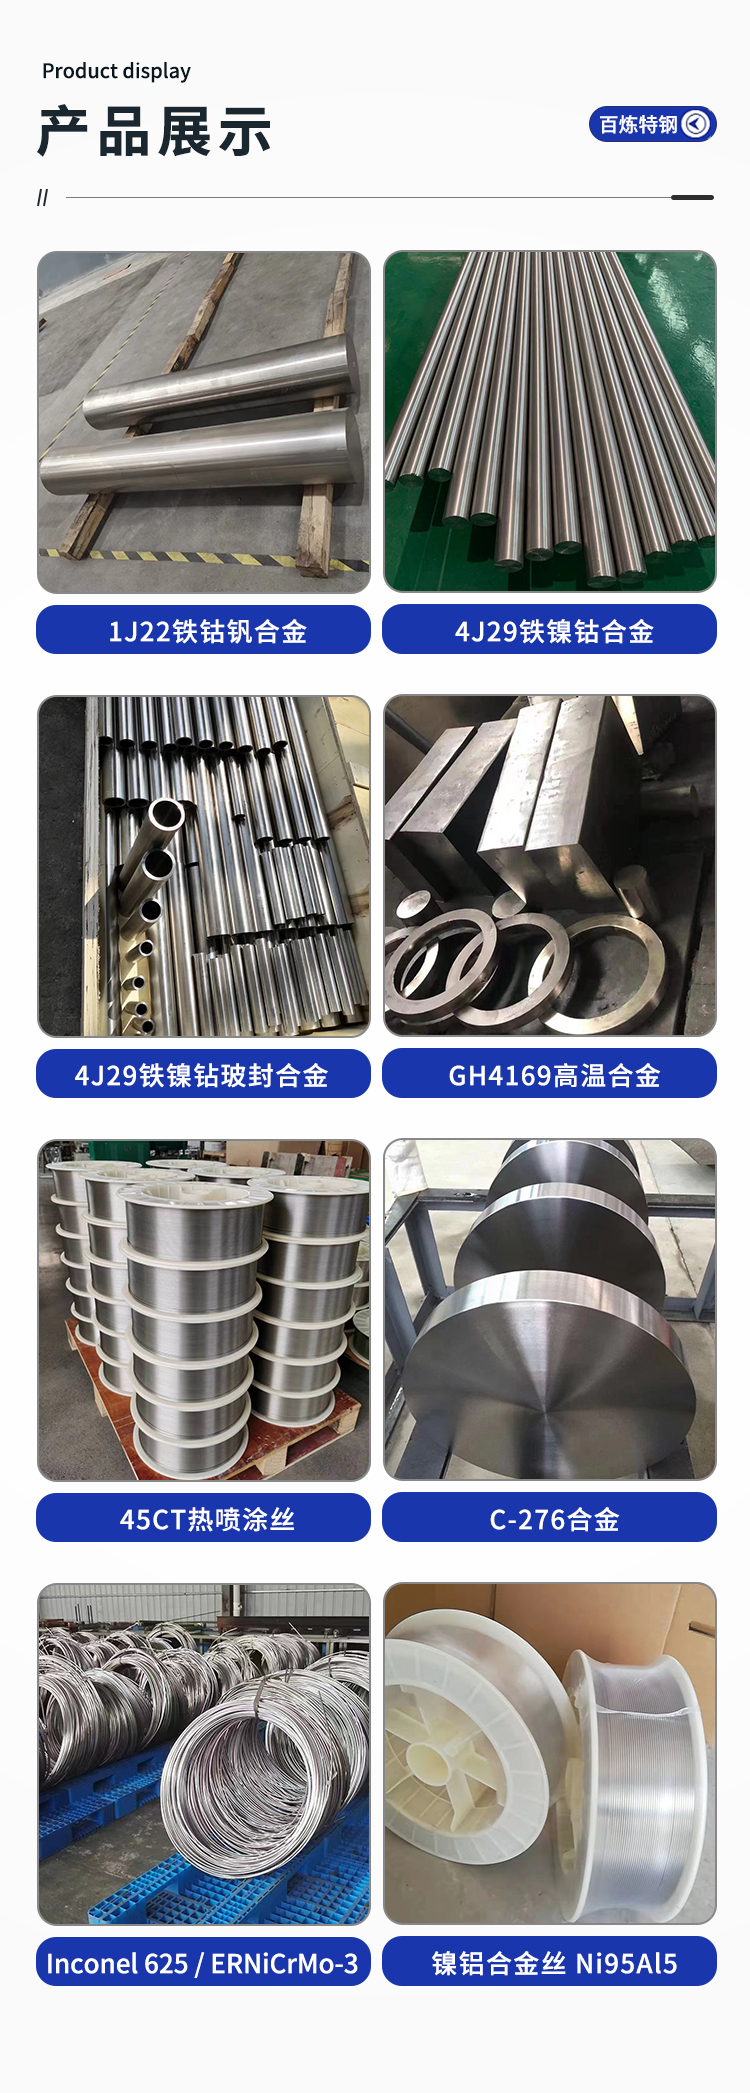 Invar alloy, low expansion alloy, plasticity, toughness, high strength, and low hardness